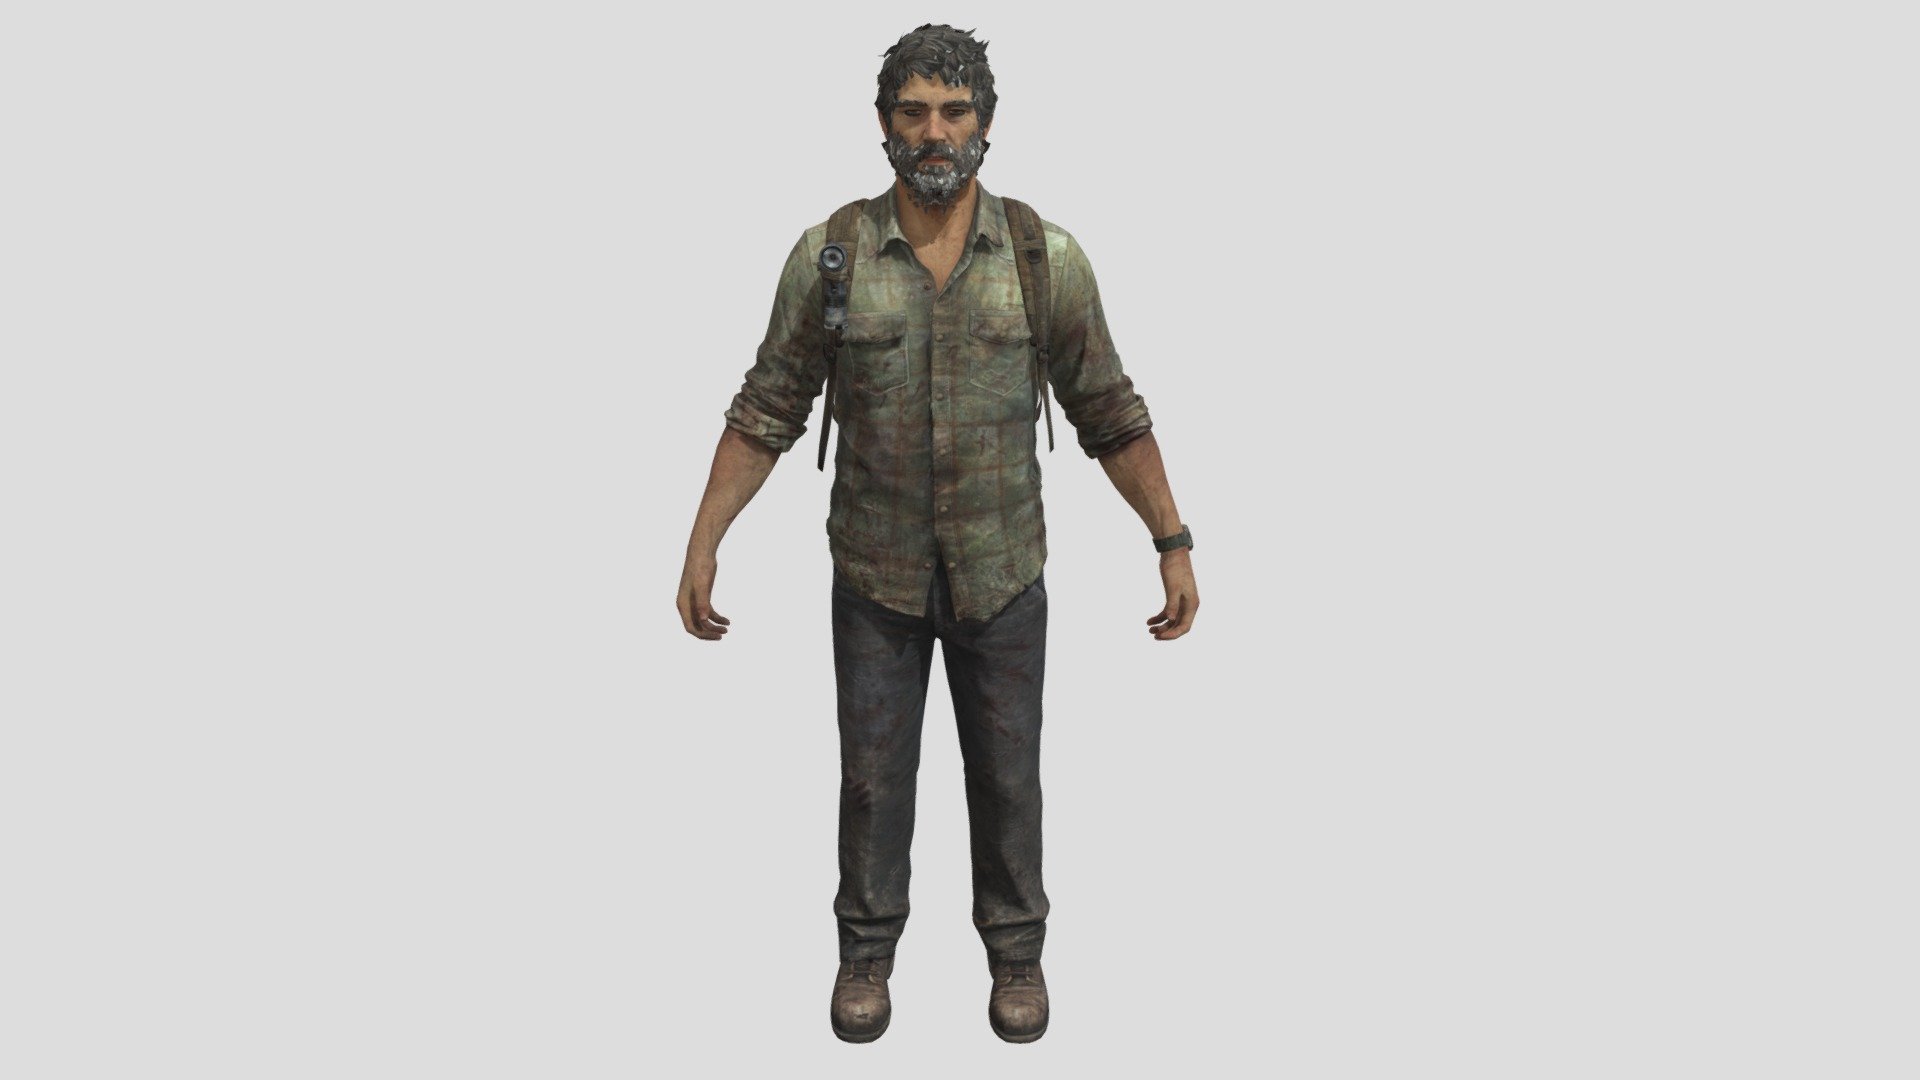 The Last Of Us 2: Joel 3D Model free download for Unity and Unreal Engine!!!!!!!!!!!!!!!!!!

MY CODE CREATOR IN FORTNITE: TEAMEW

FIND ME ON YOUTUBE: E.W. amazing games - The Last Of Us 2: Joel - Download Free 3D model by EWTube0 3d model